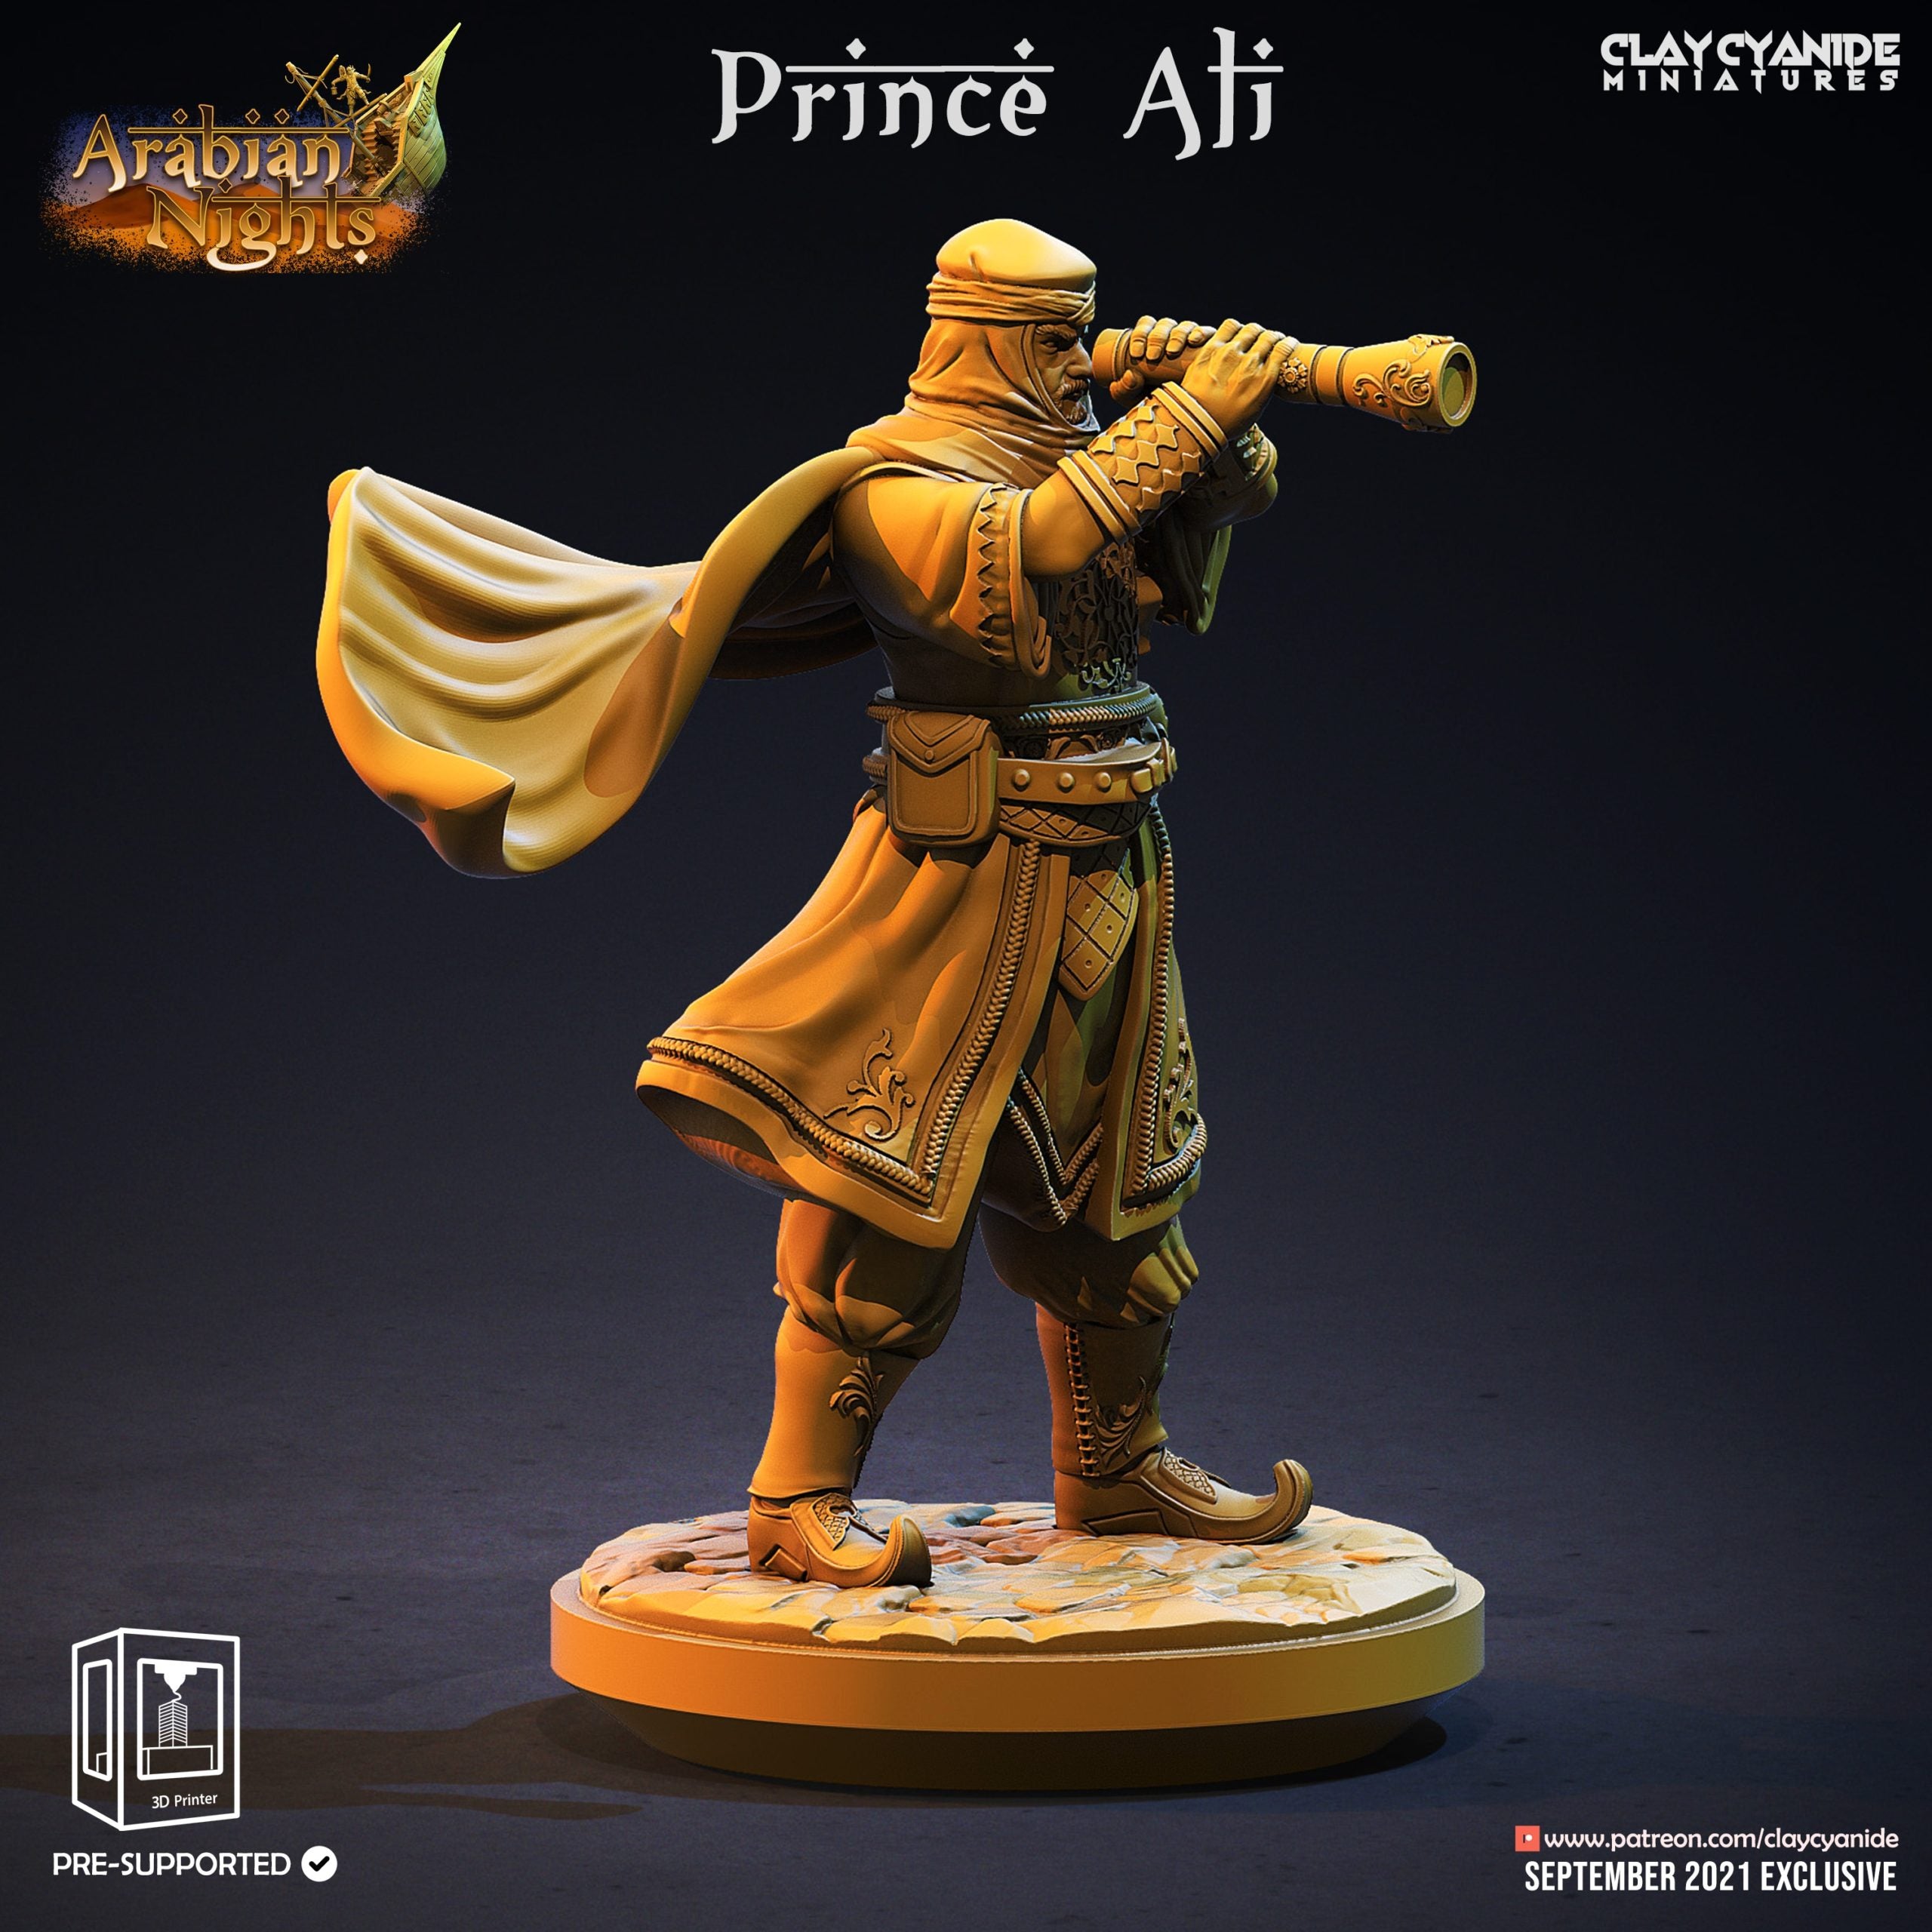 Prince of the Indies - Prince Ali